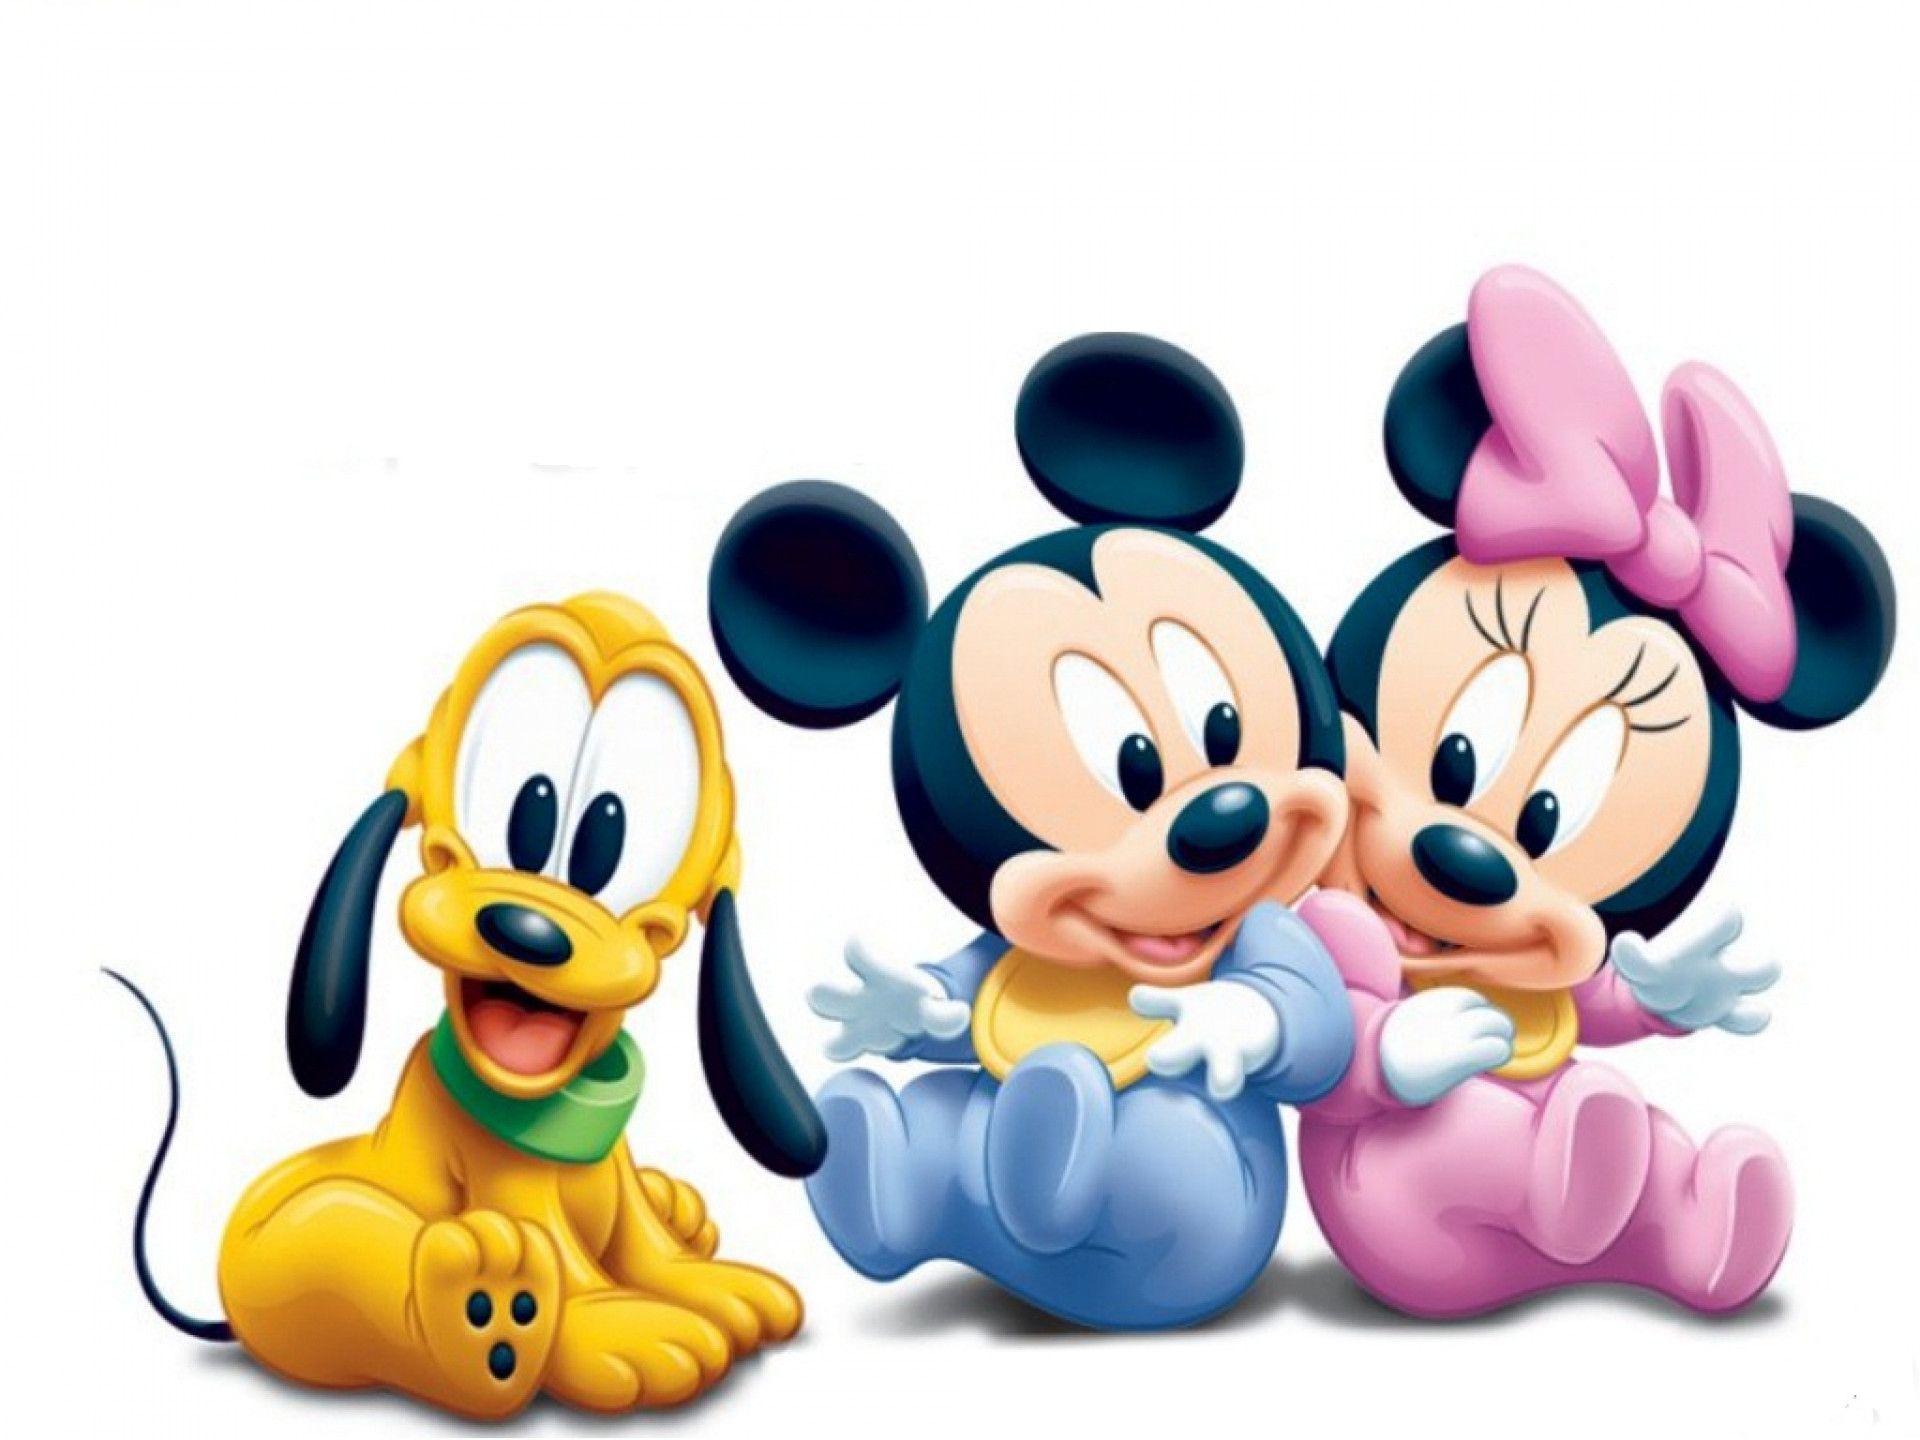 Baby Mickey Mouse, Goofy And Minnie Mouse Cartoon Wallpaper